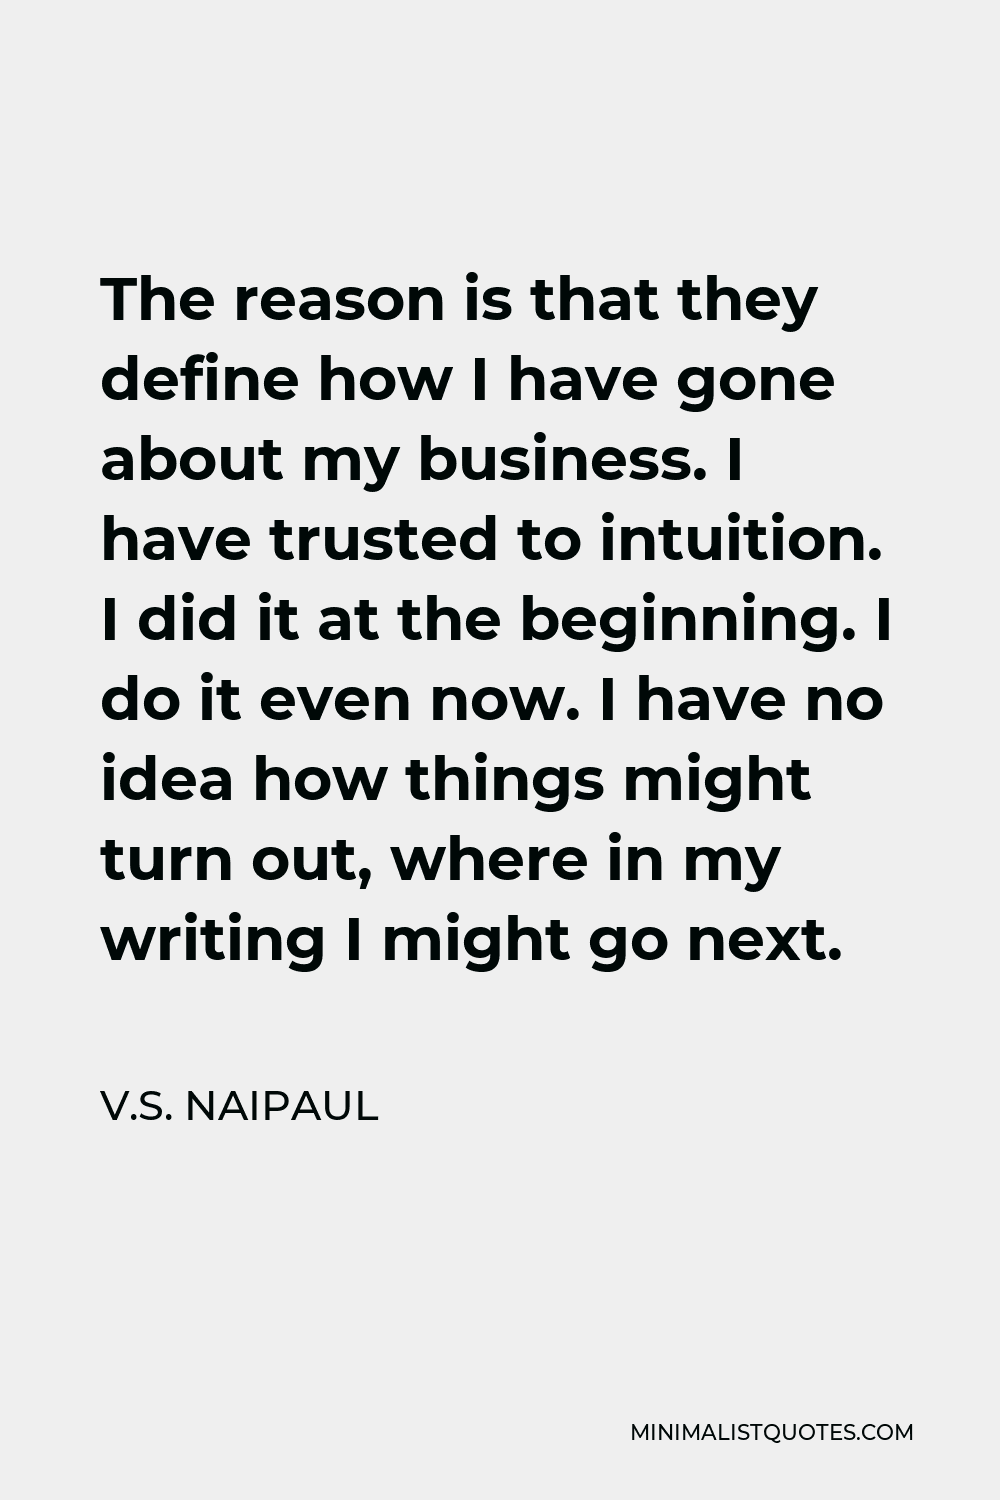 V.S. Naipaul Quote - The reason is that they define how I have gone about my business. I have trusted to intuition. I did it at the beginning. I do it even now. I have no idea how things might turn out, where in my writing I might go next.